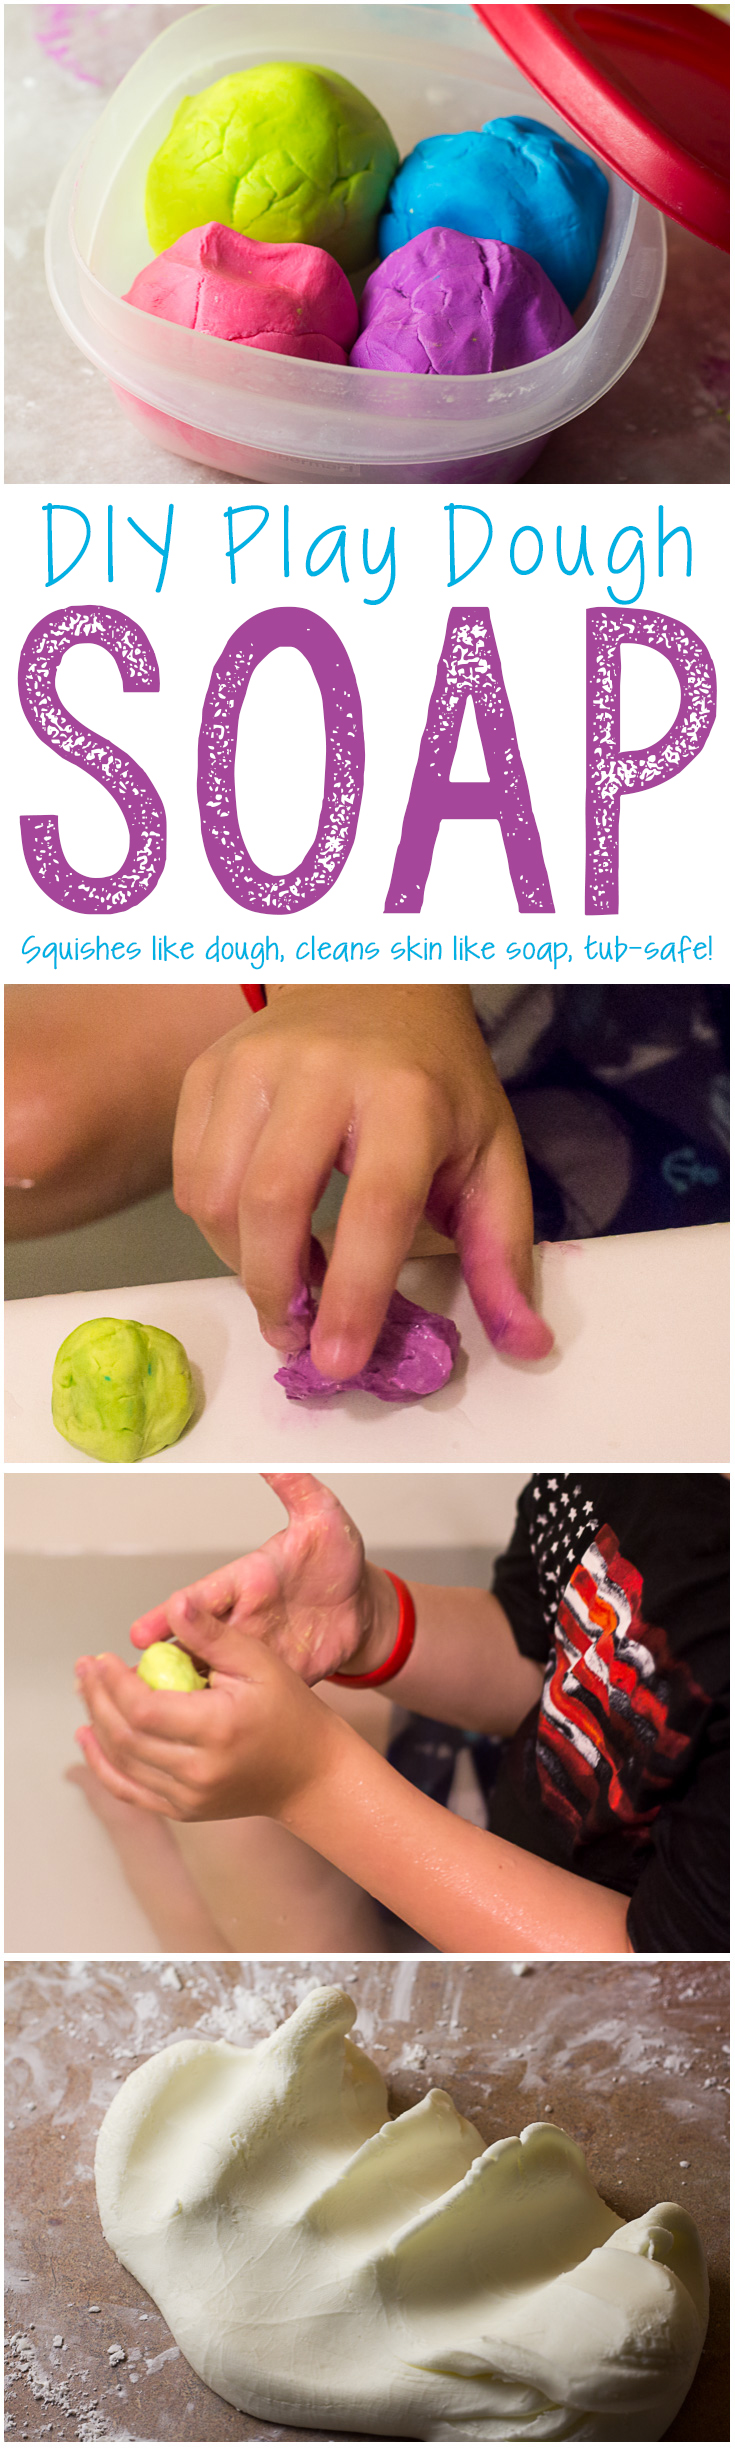 Fun & Easy 3 Ingredient Bath Tub Painting Activity For Toddlers